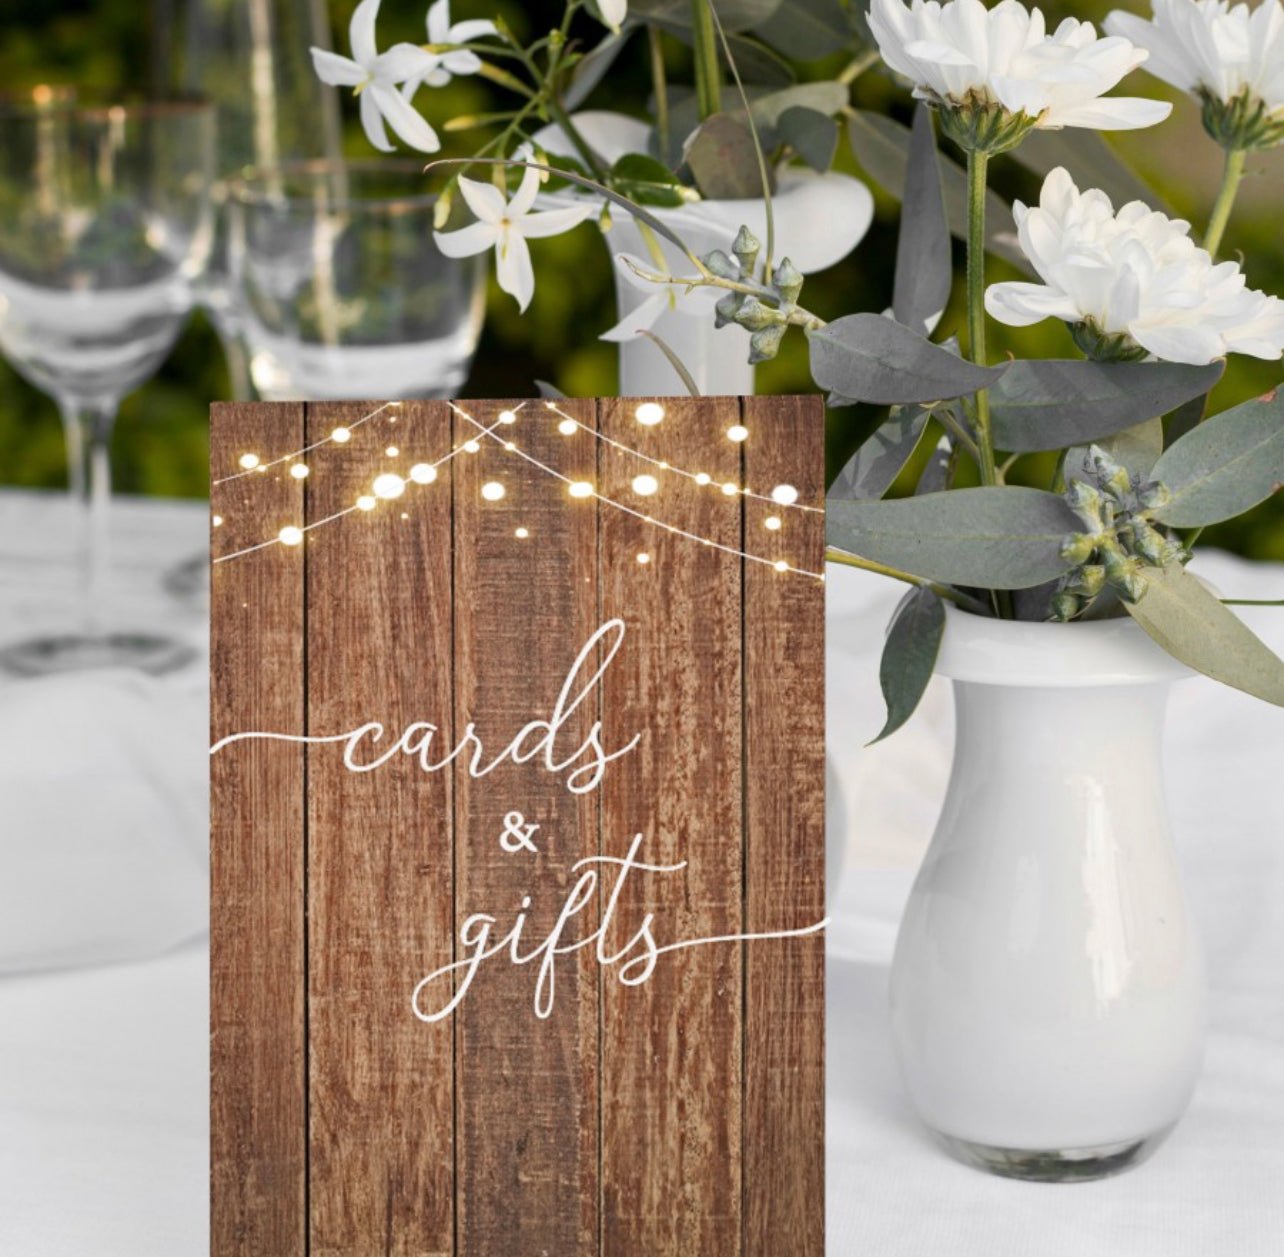 Rustic Wooden Lights Cards & Gifts Sign - Cute as a Button by Laura